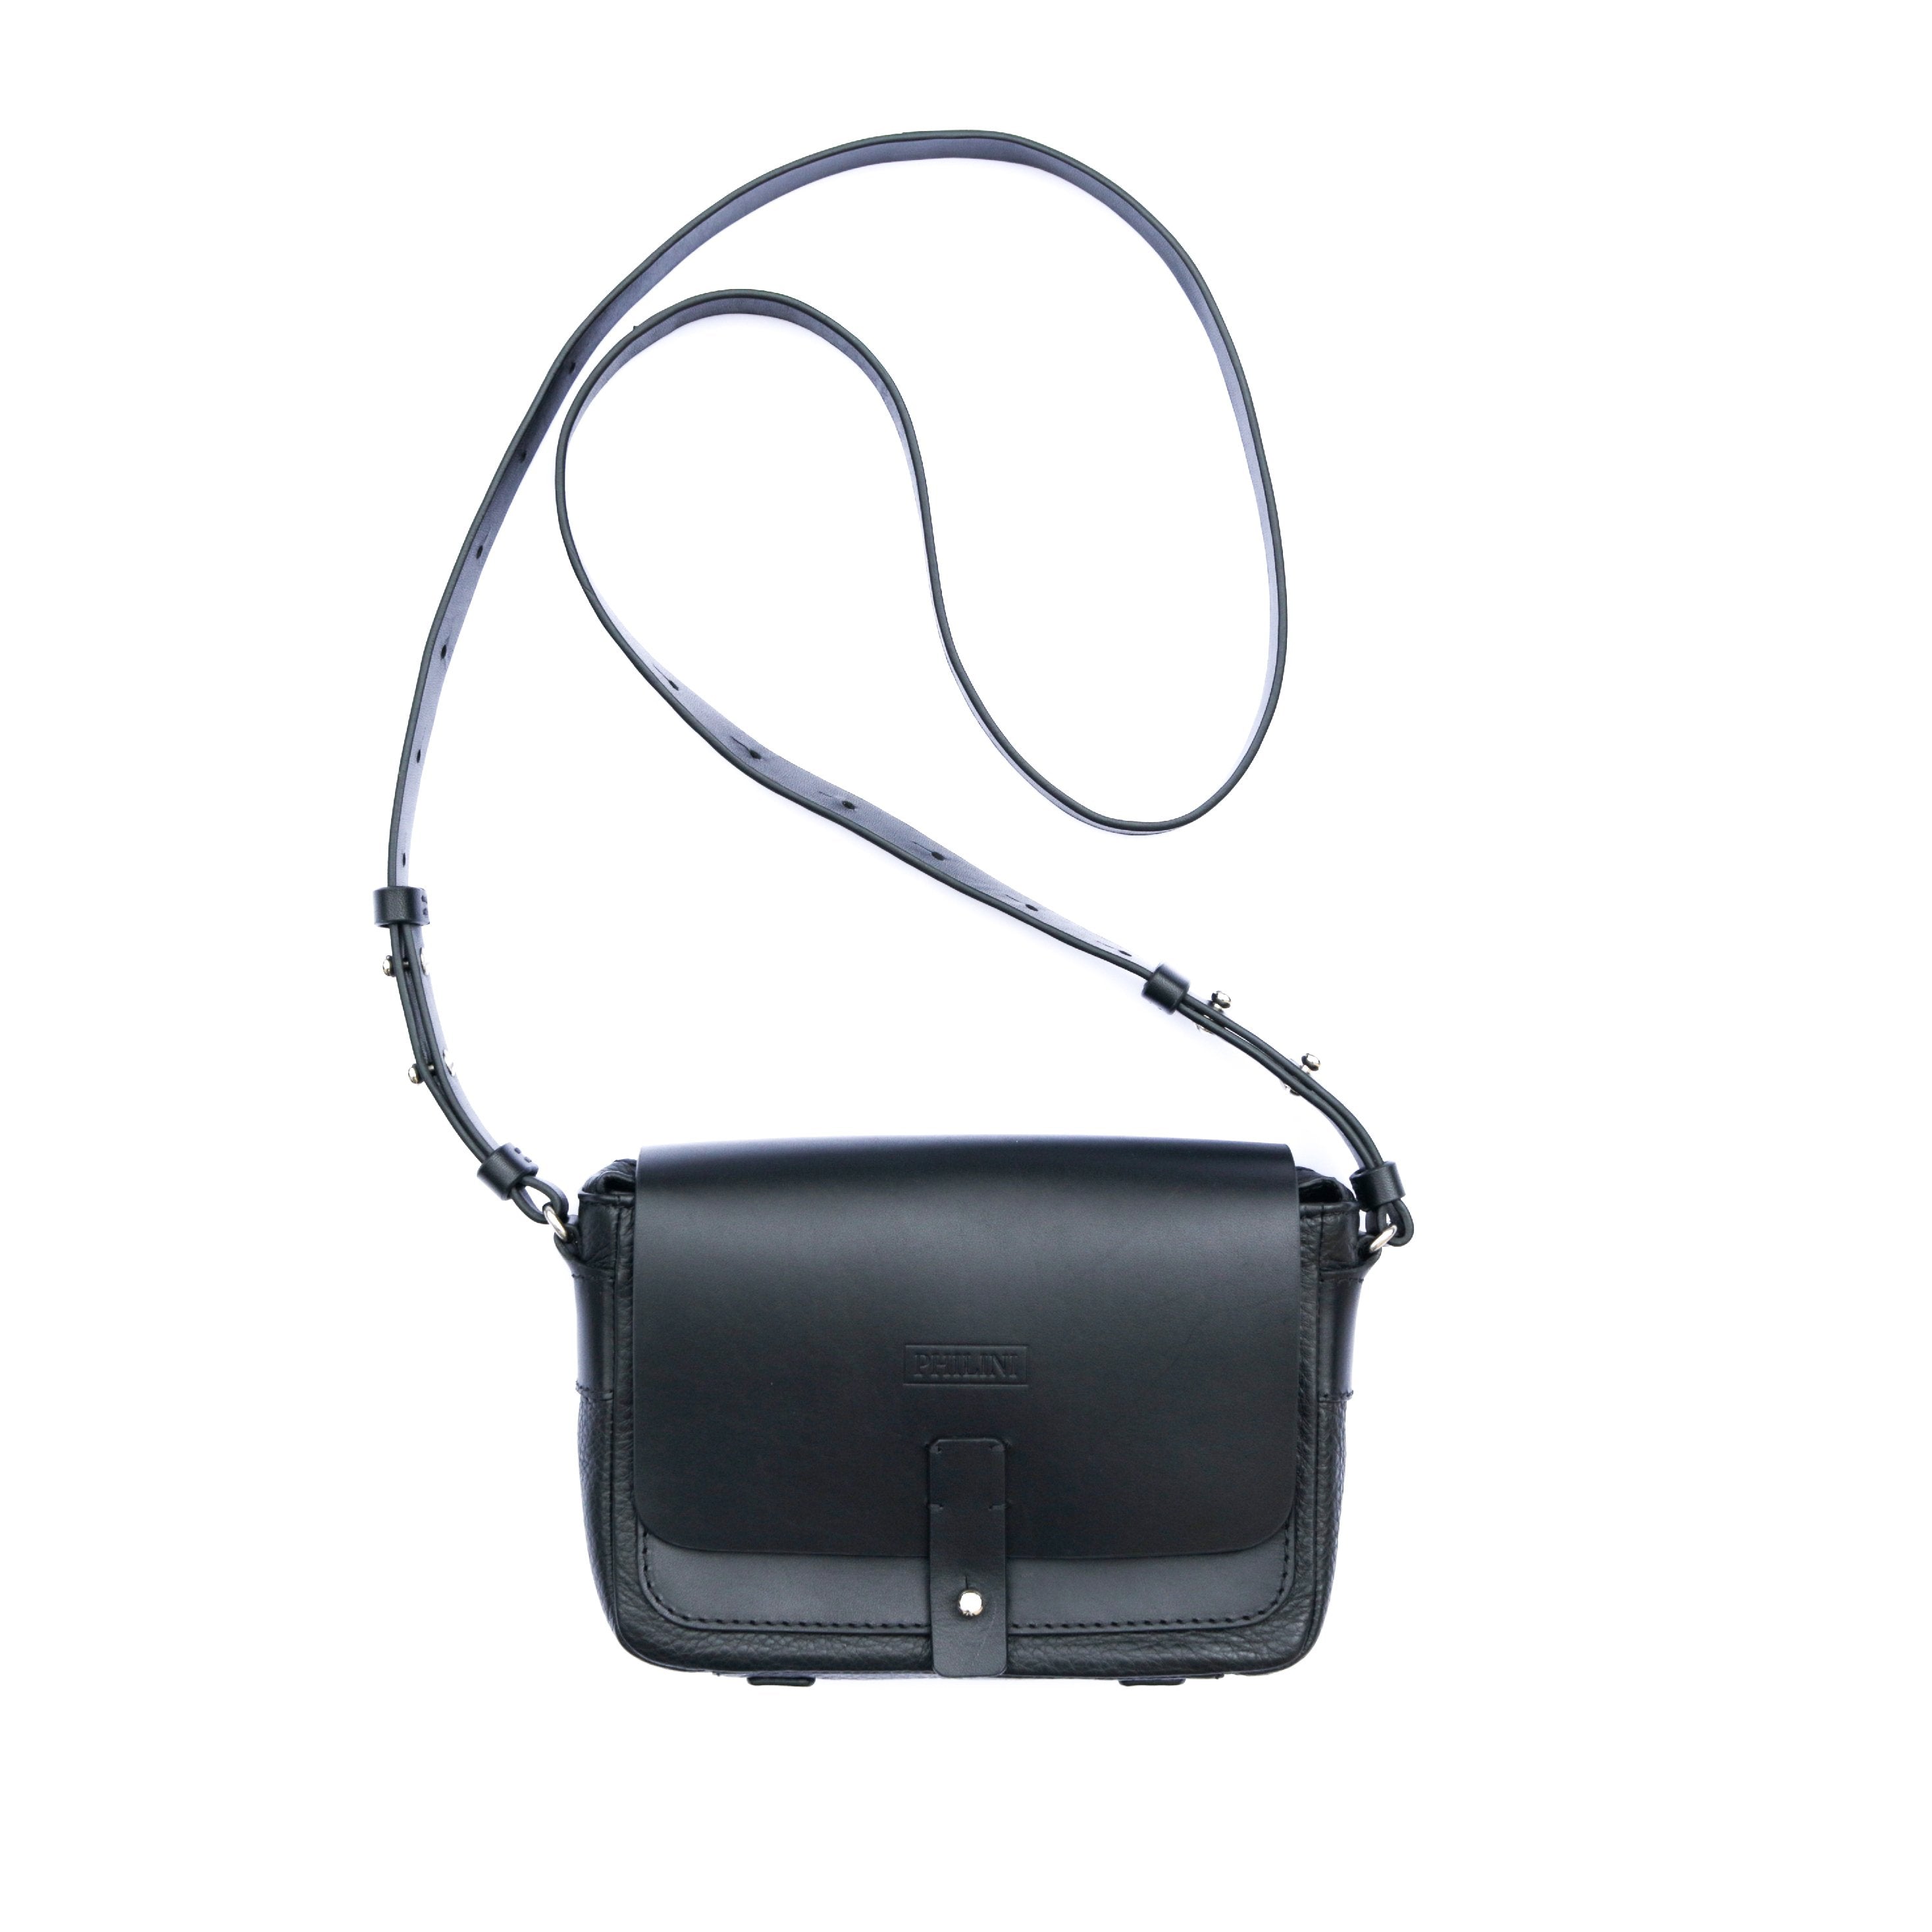 Whitney Bag. Beautiful and very easy to handle black bag that fit to any sporty or classic look.